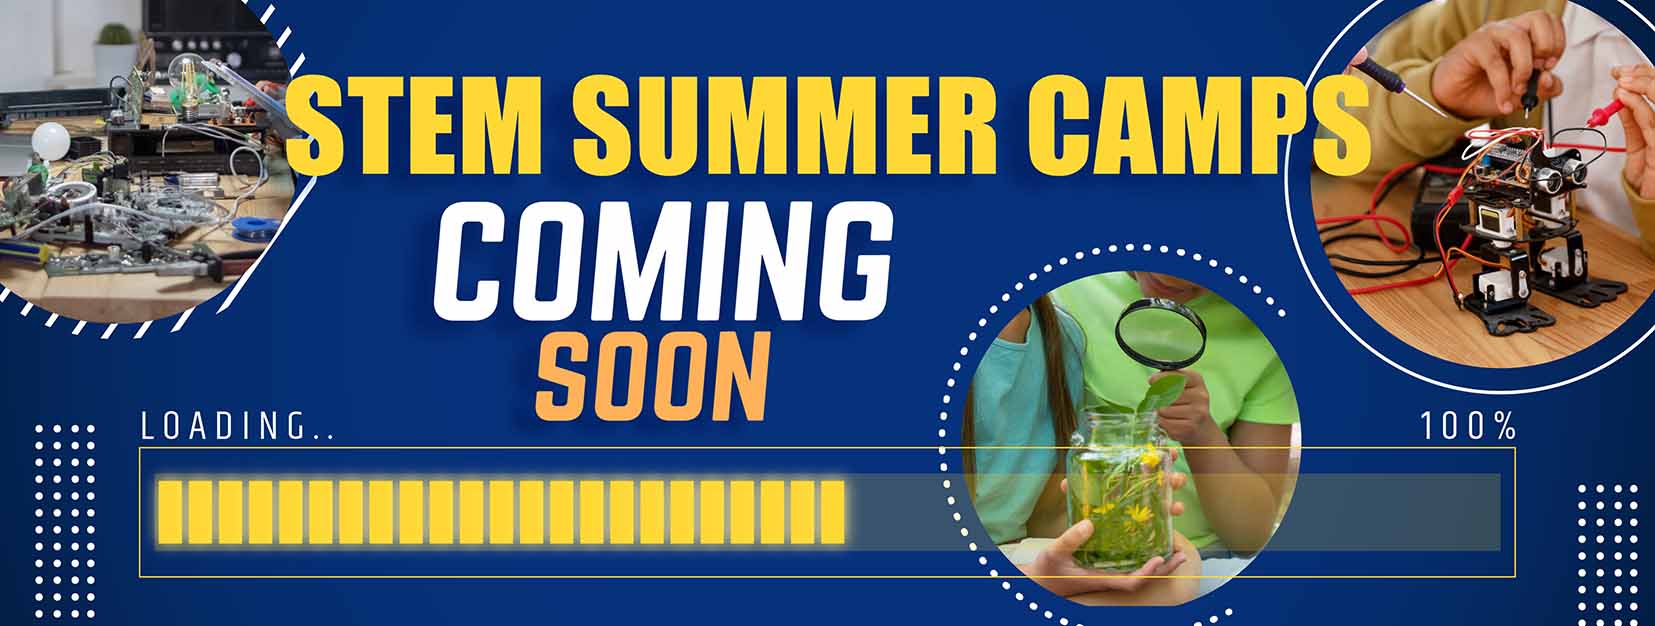 summer camps as coming soon